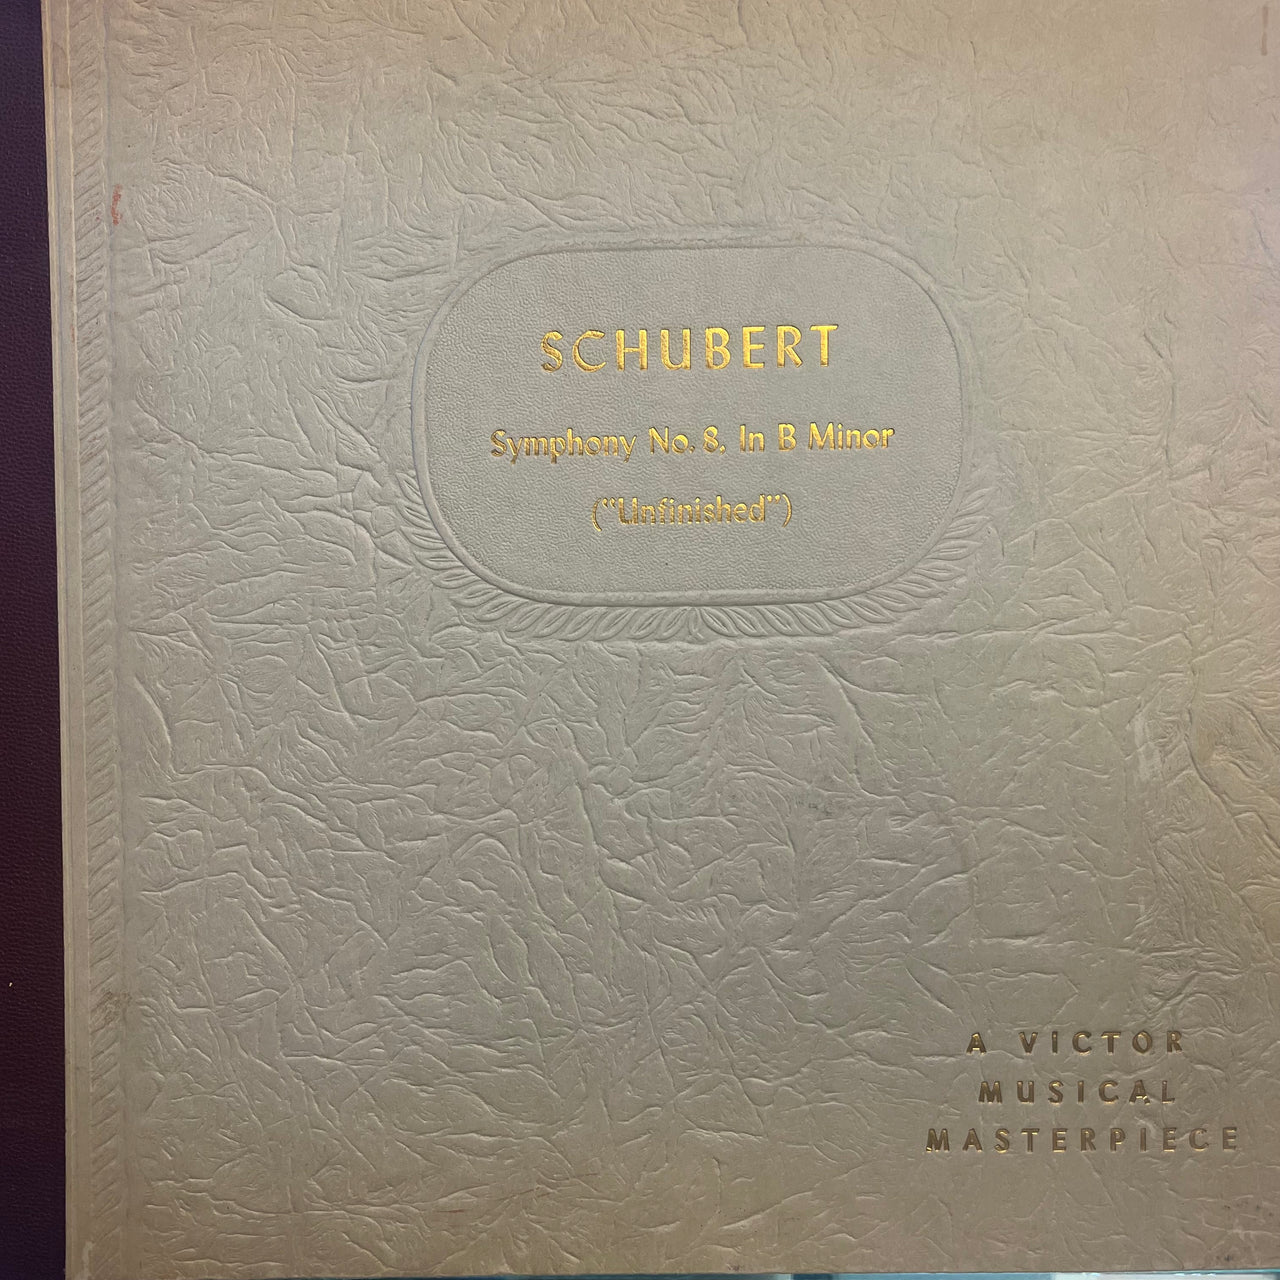 Schubert* - Boston Symphony Orchestra With Serge Koussevitzky - Symphony No. 8 In B Minor, "Unfinished" (Very Good (VG)) Classical (3xShellac, 12", Album)